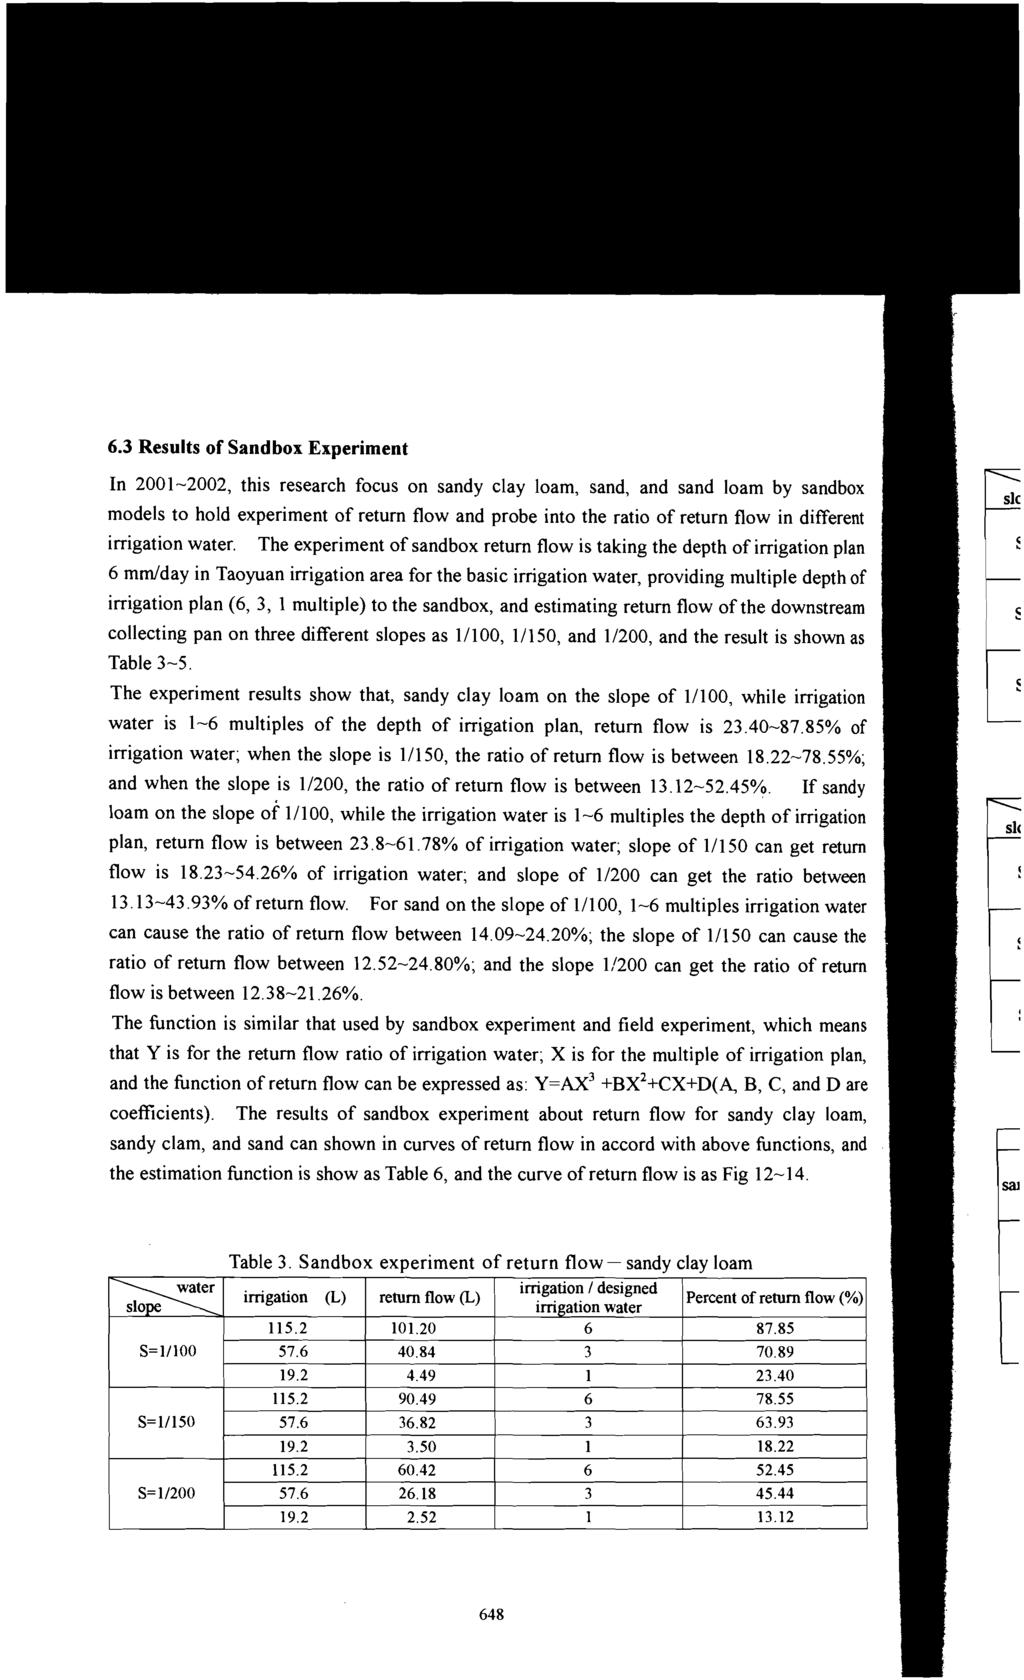 6.3 Results of Sandbox Experiment In 2001-2002, this research focus on sandy clay loam, sand, and sand loam by sandbox models to hold experiment of return flow and probe into the ratio of return flow